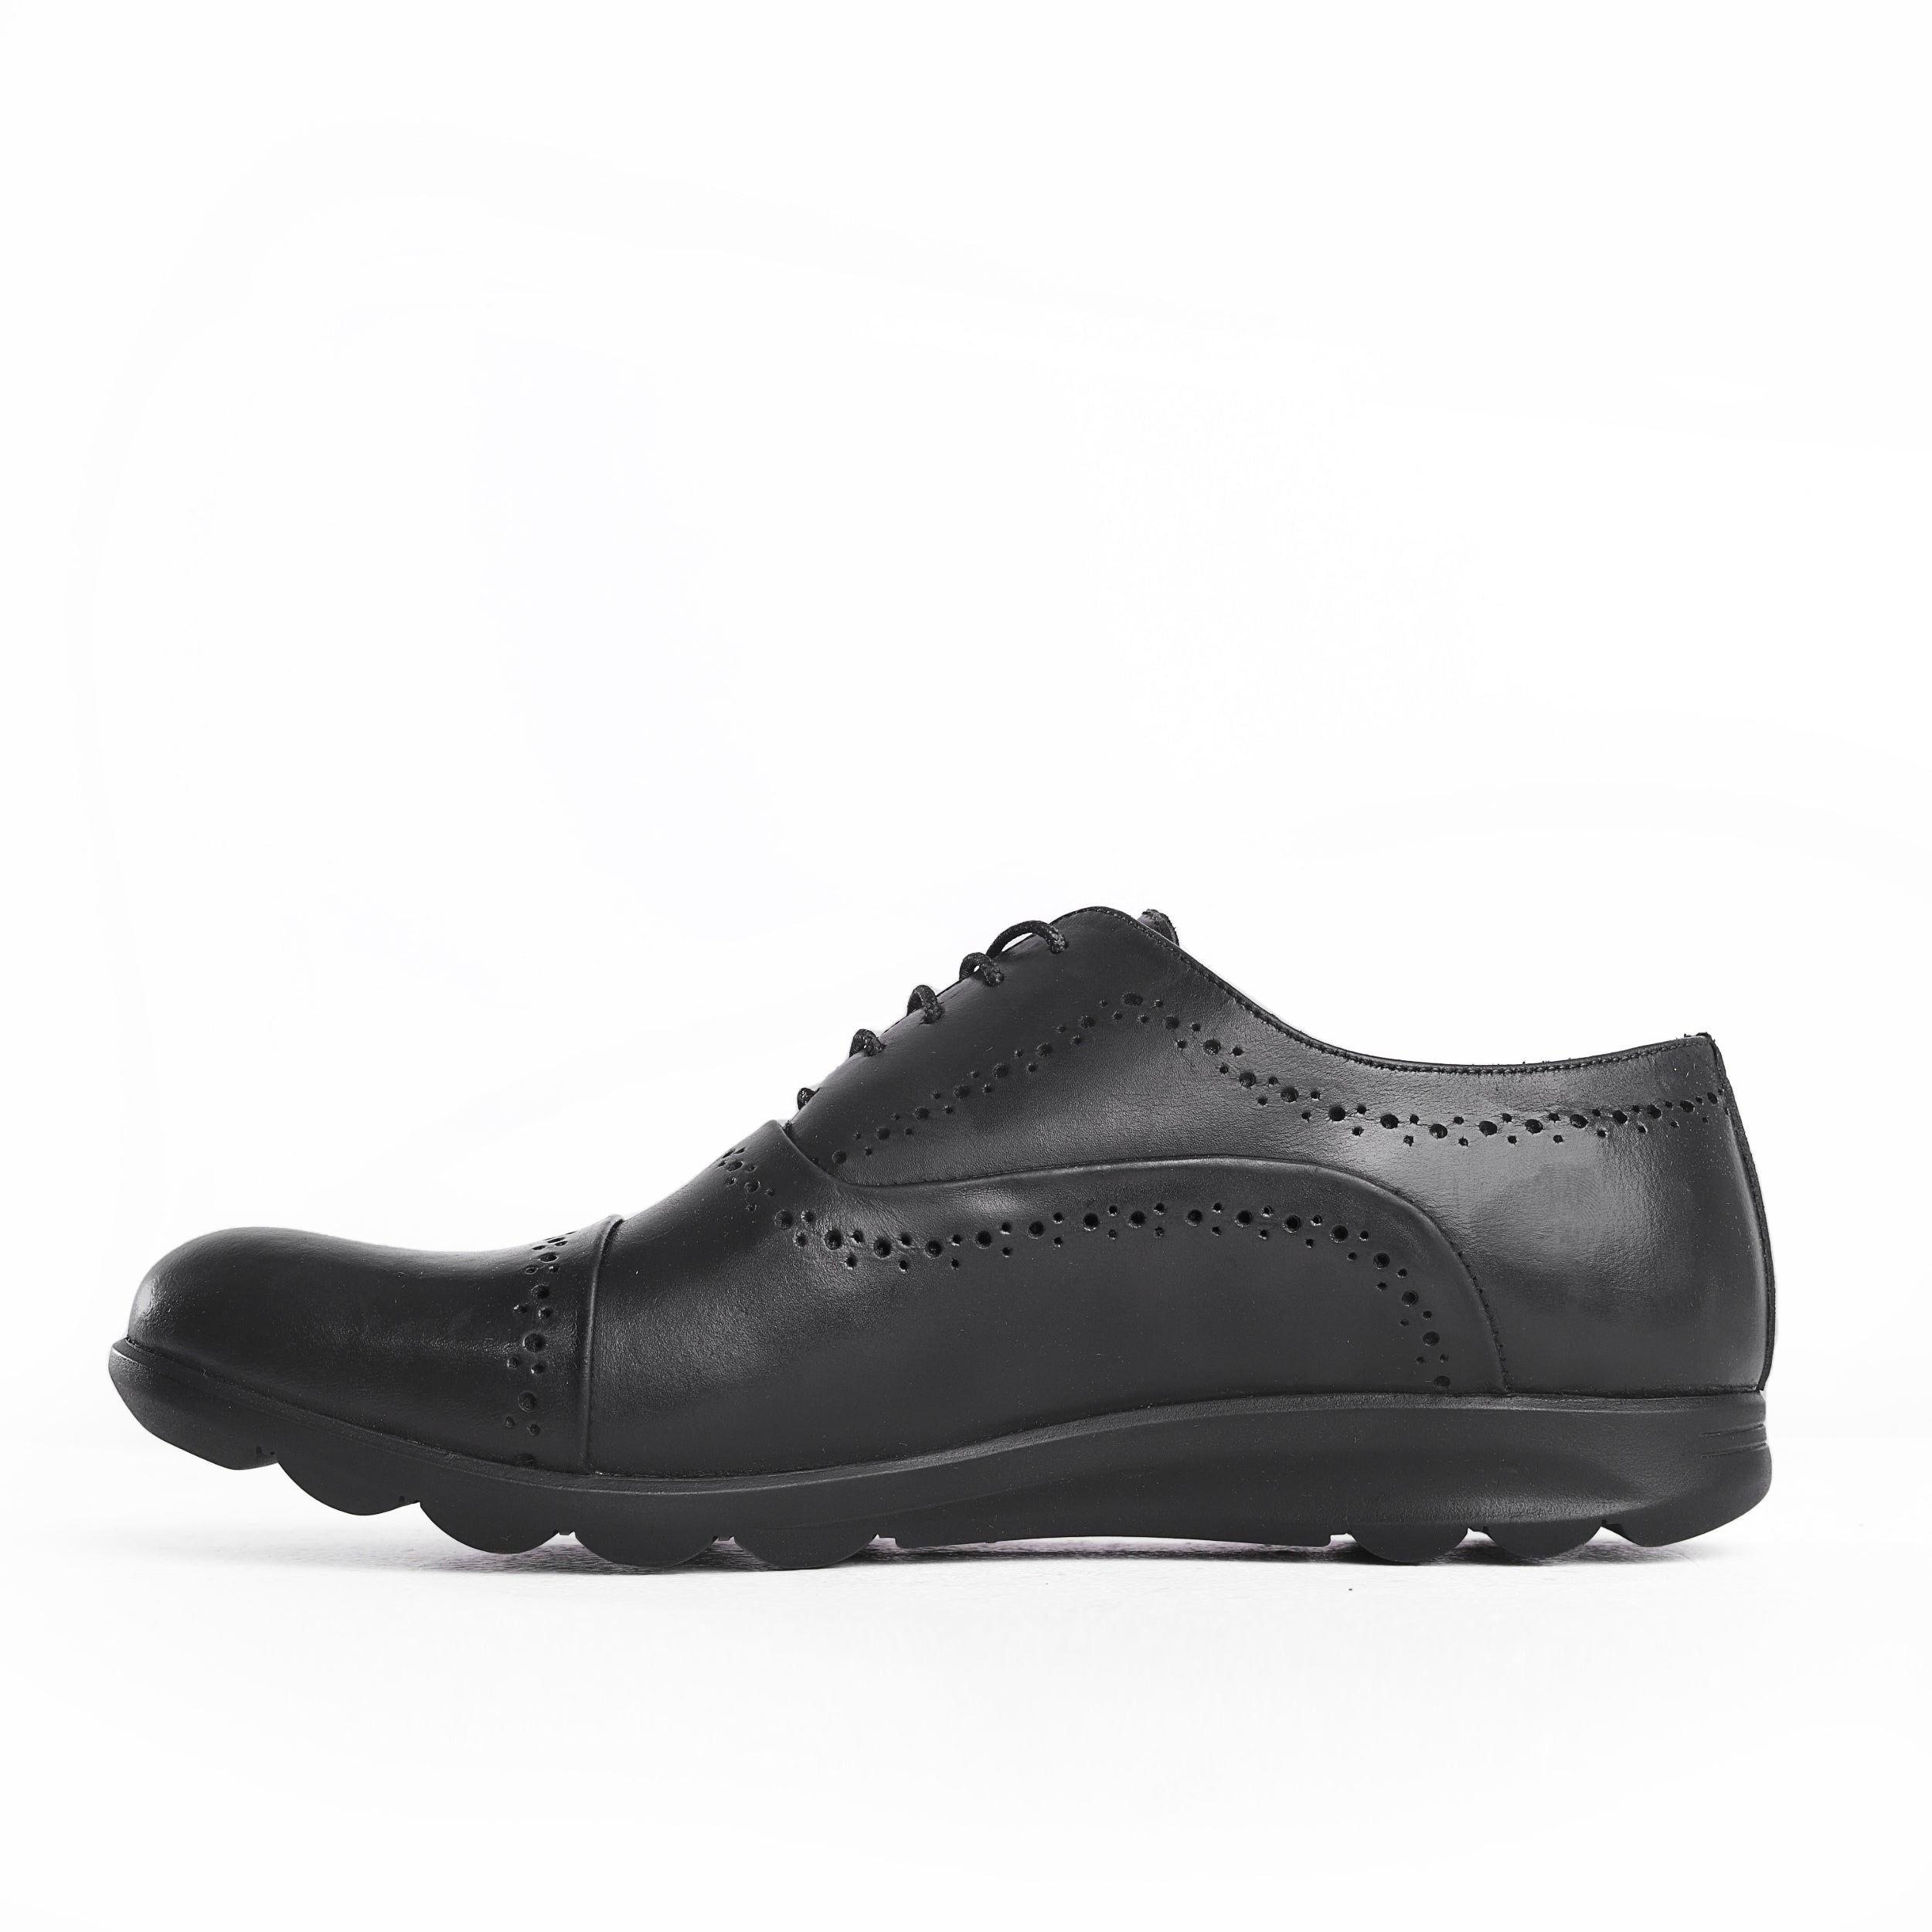 Heritage Black Classic Shoes For Men